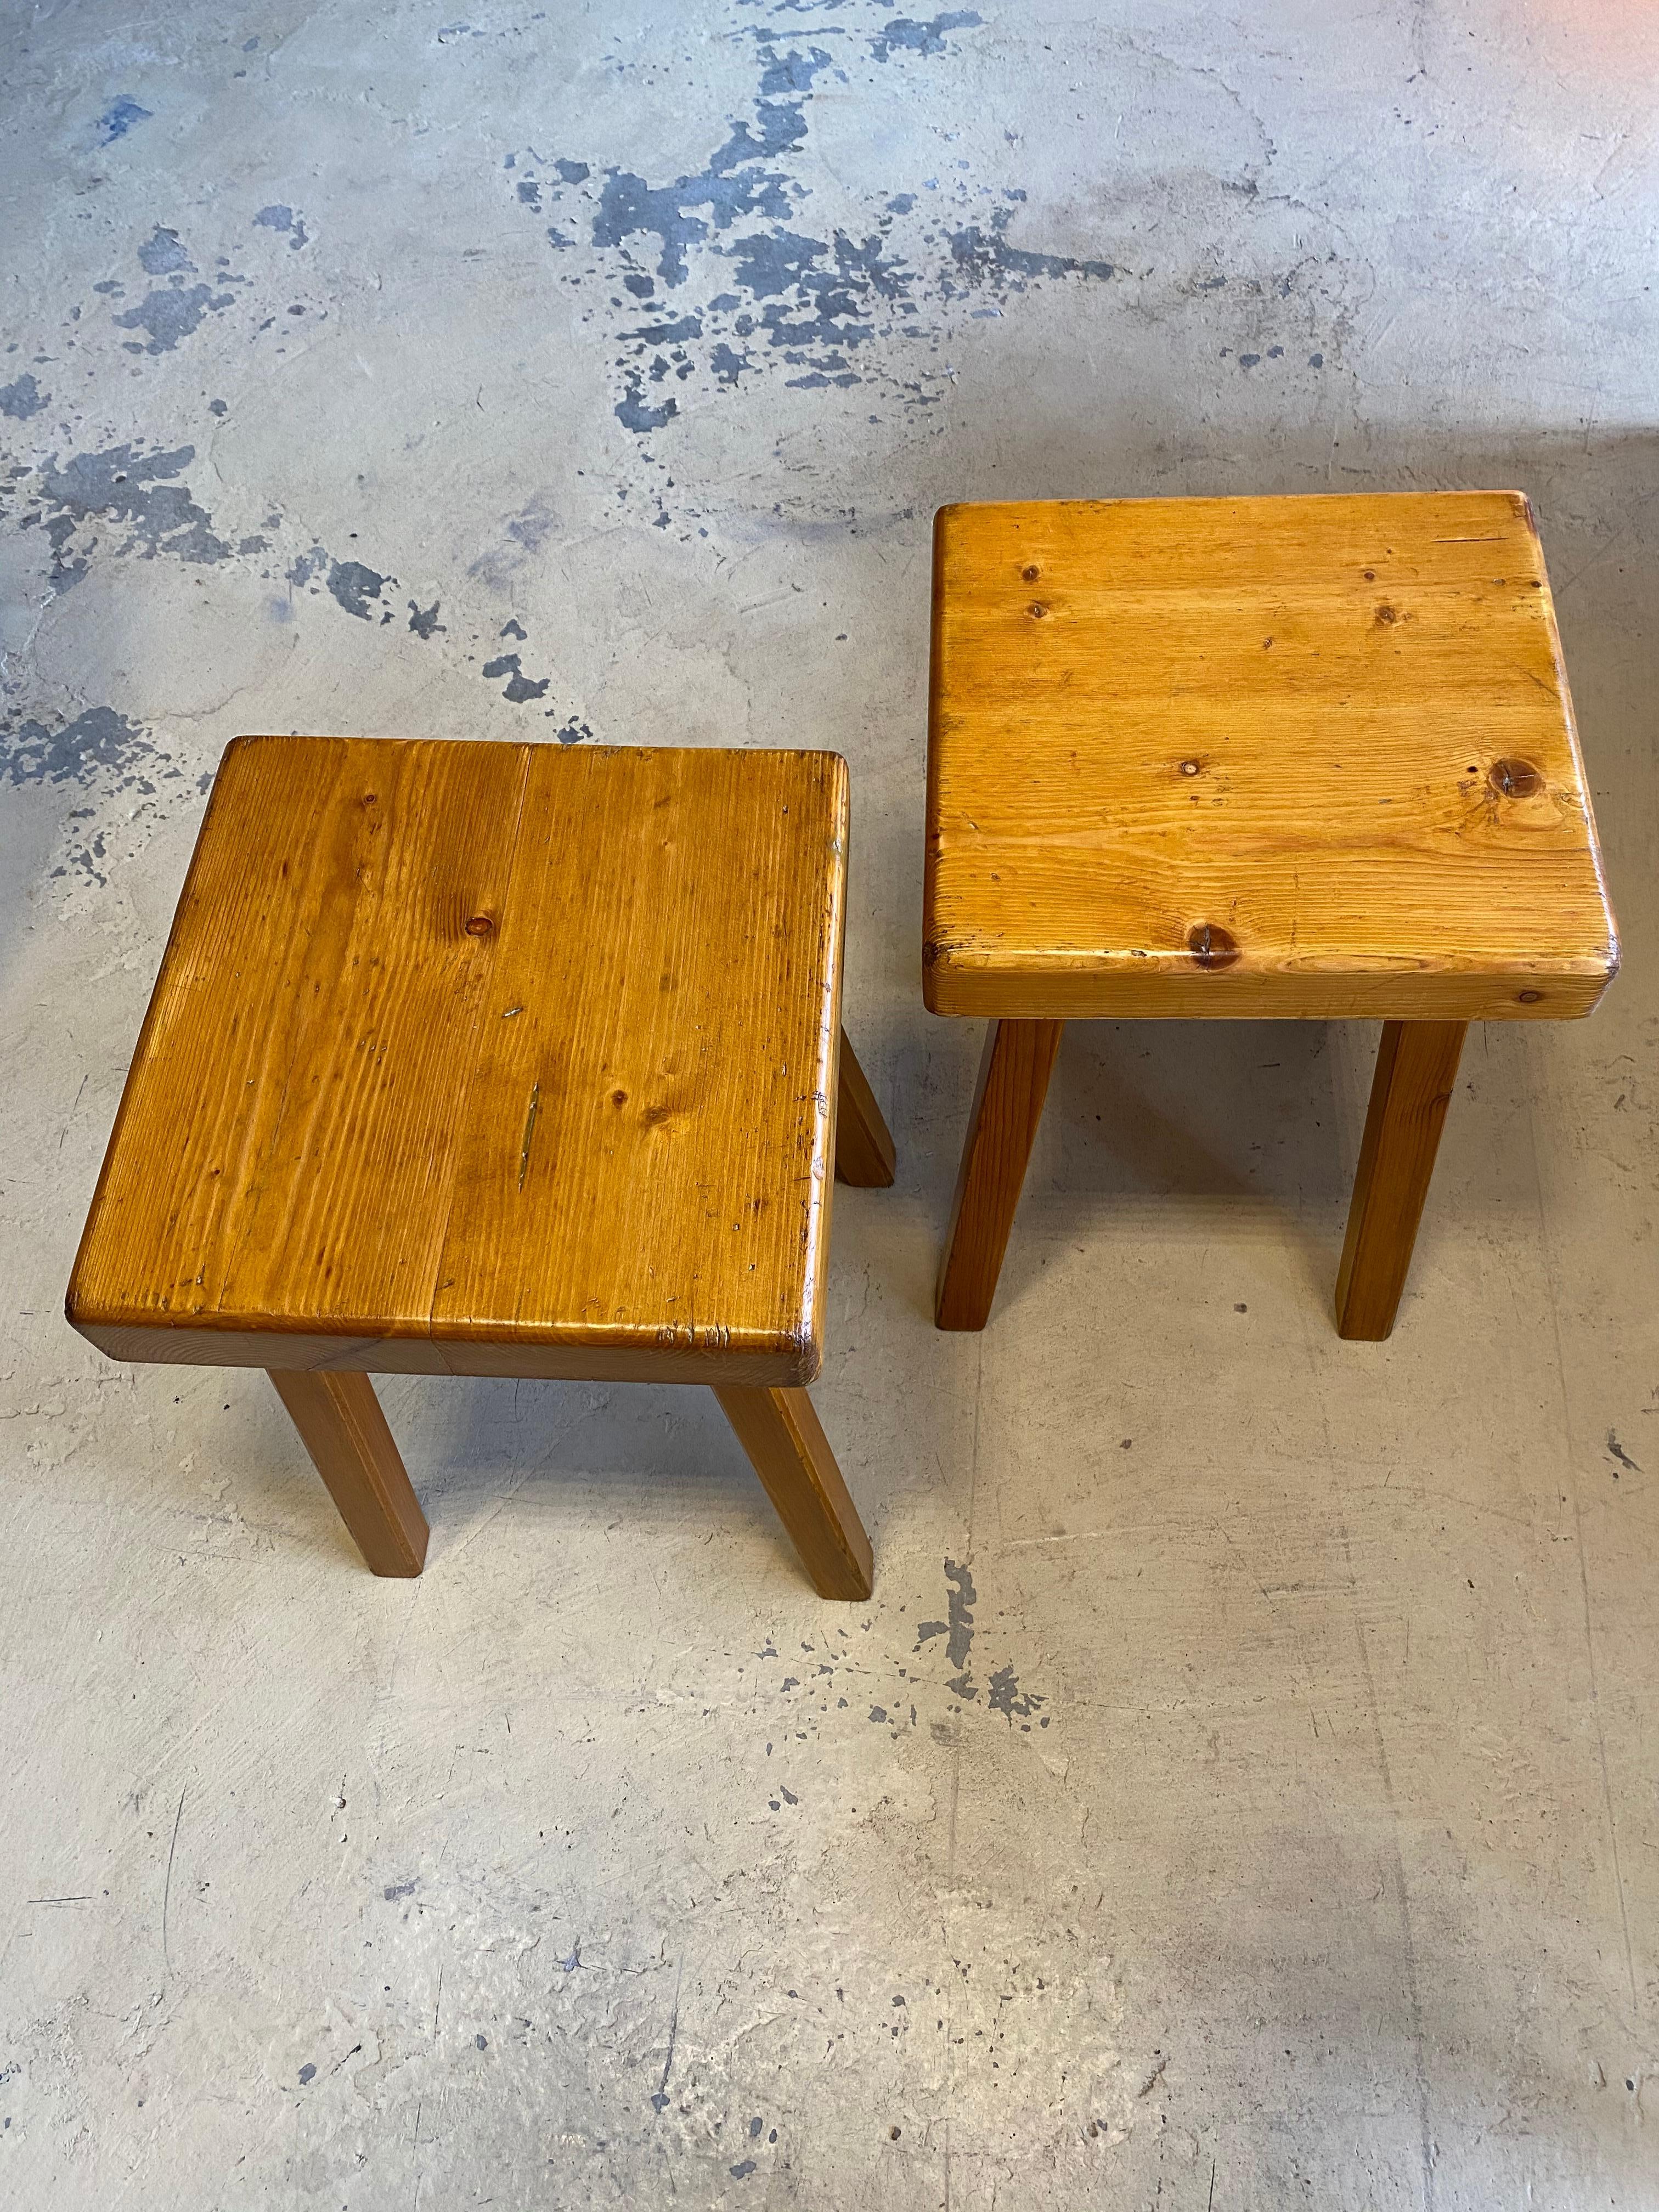 Charlotte Perriand's Square Stools 1